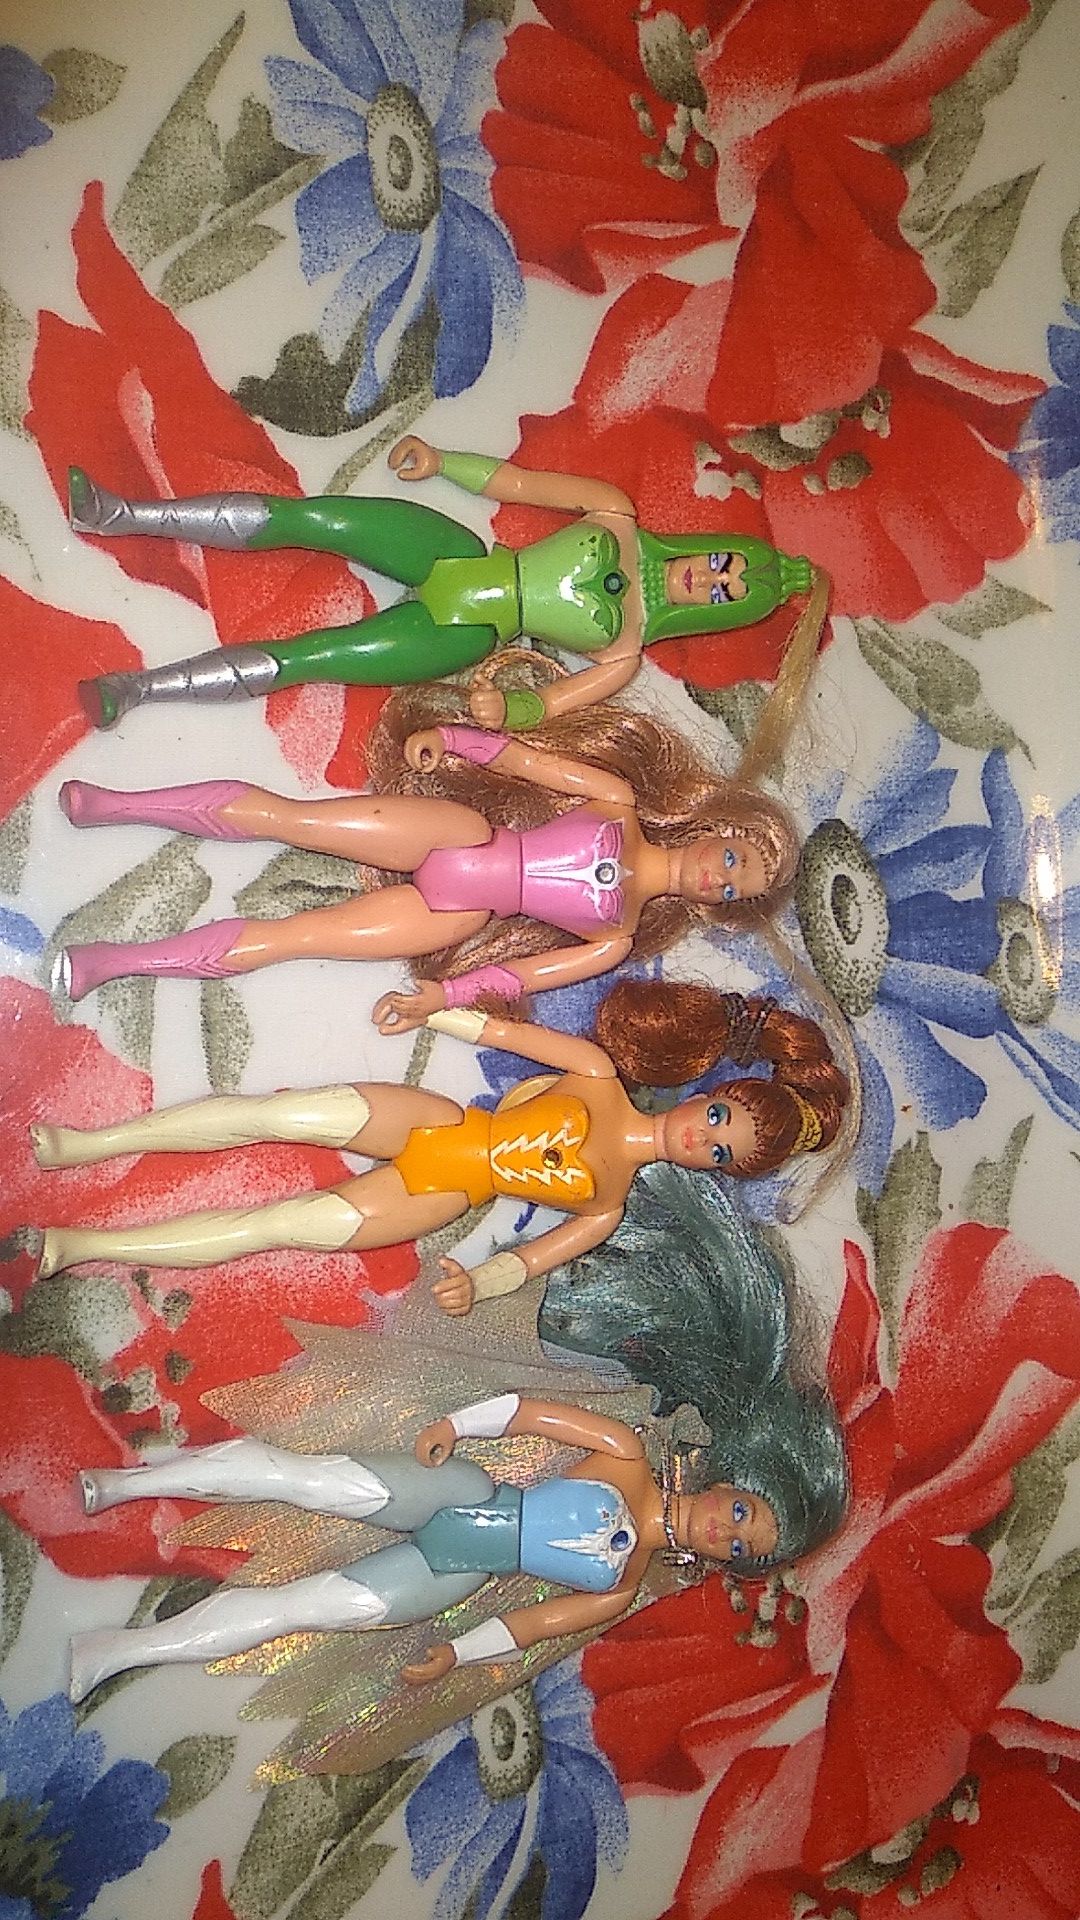 1980s SHEE-RA actions figures